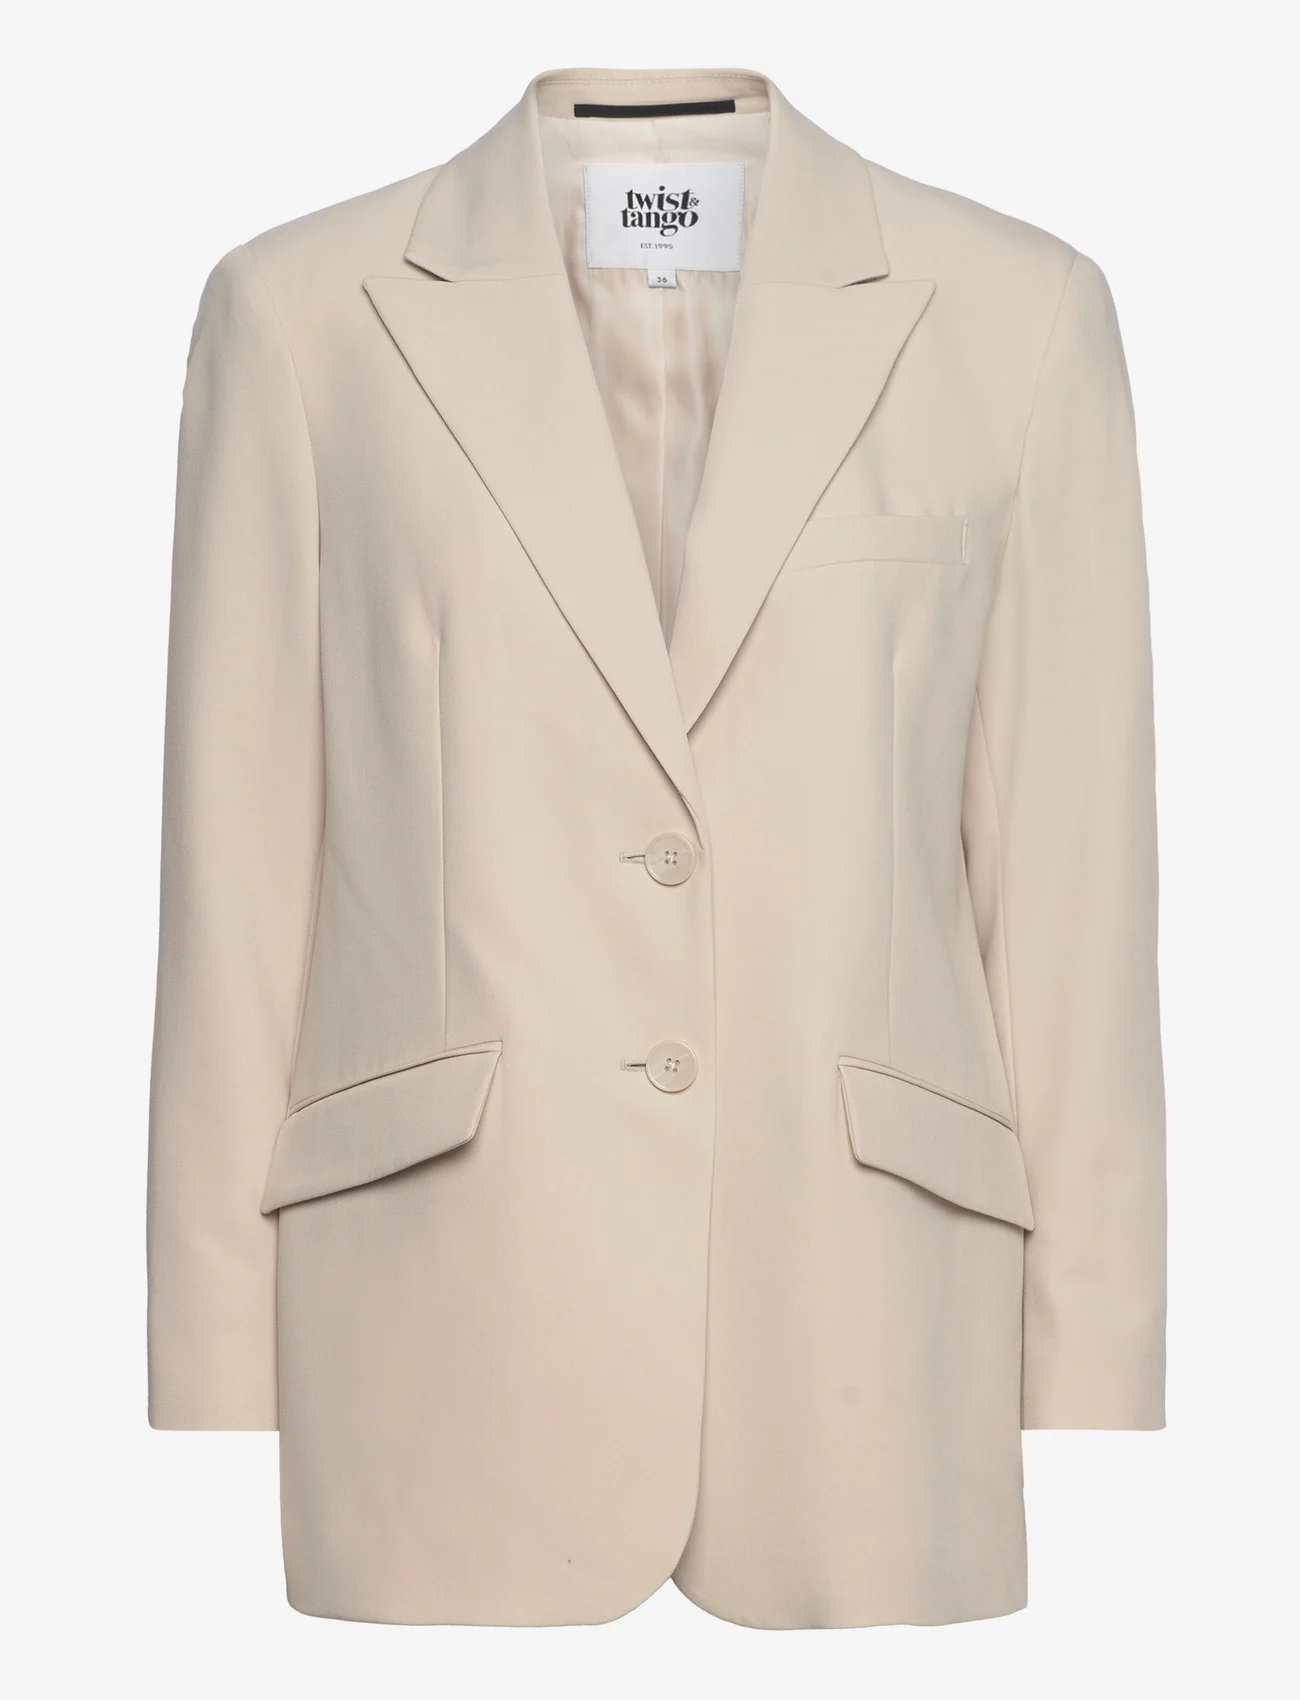 Twist & Tango - Bailey Blazer - party wear at outlet prices - lt beige - 0